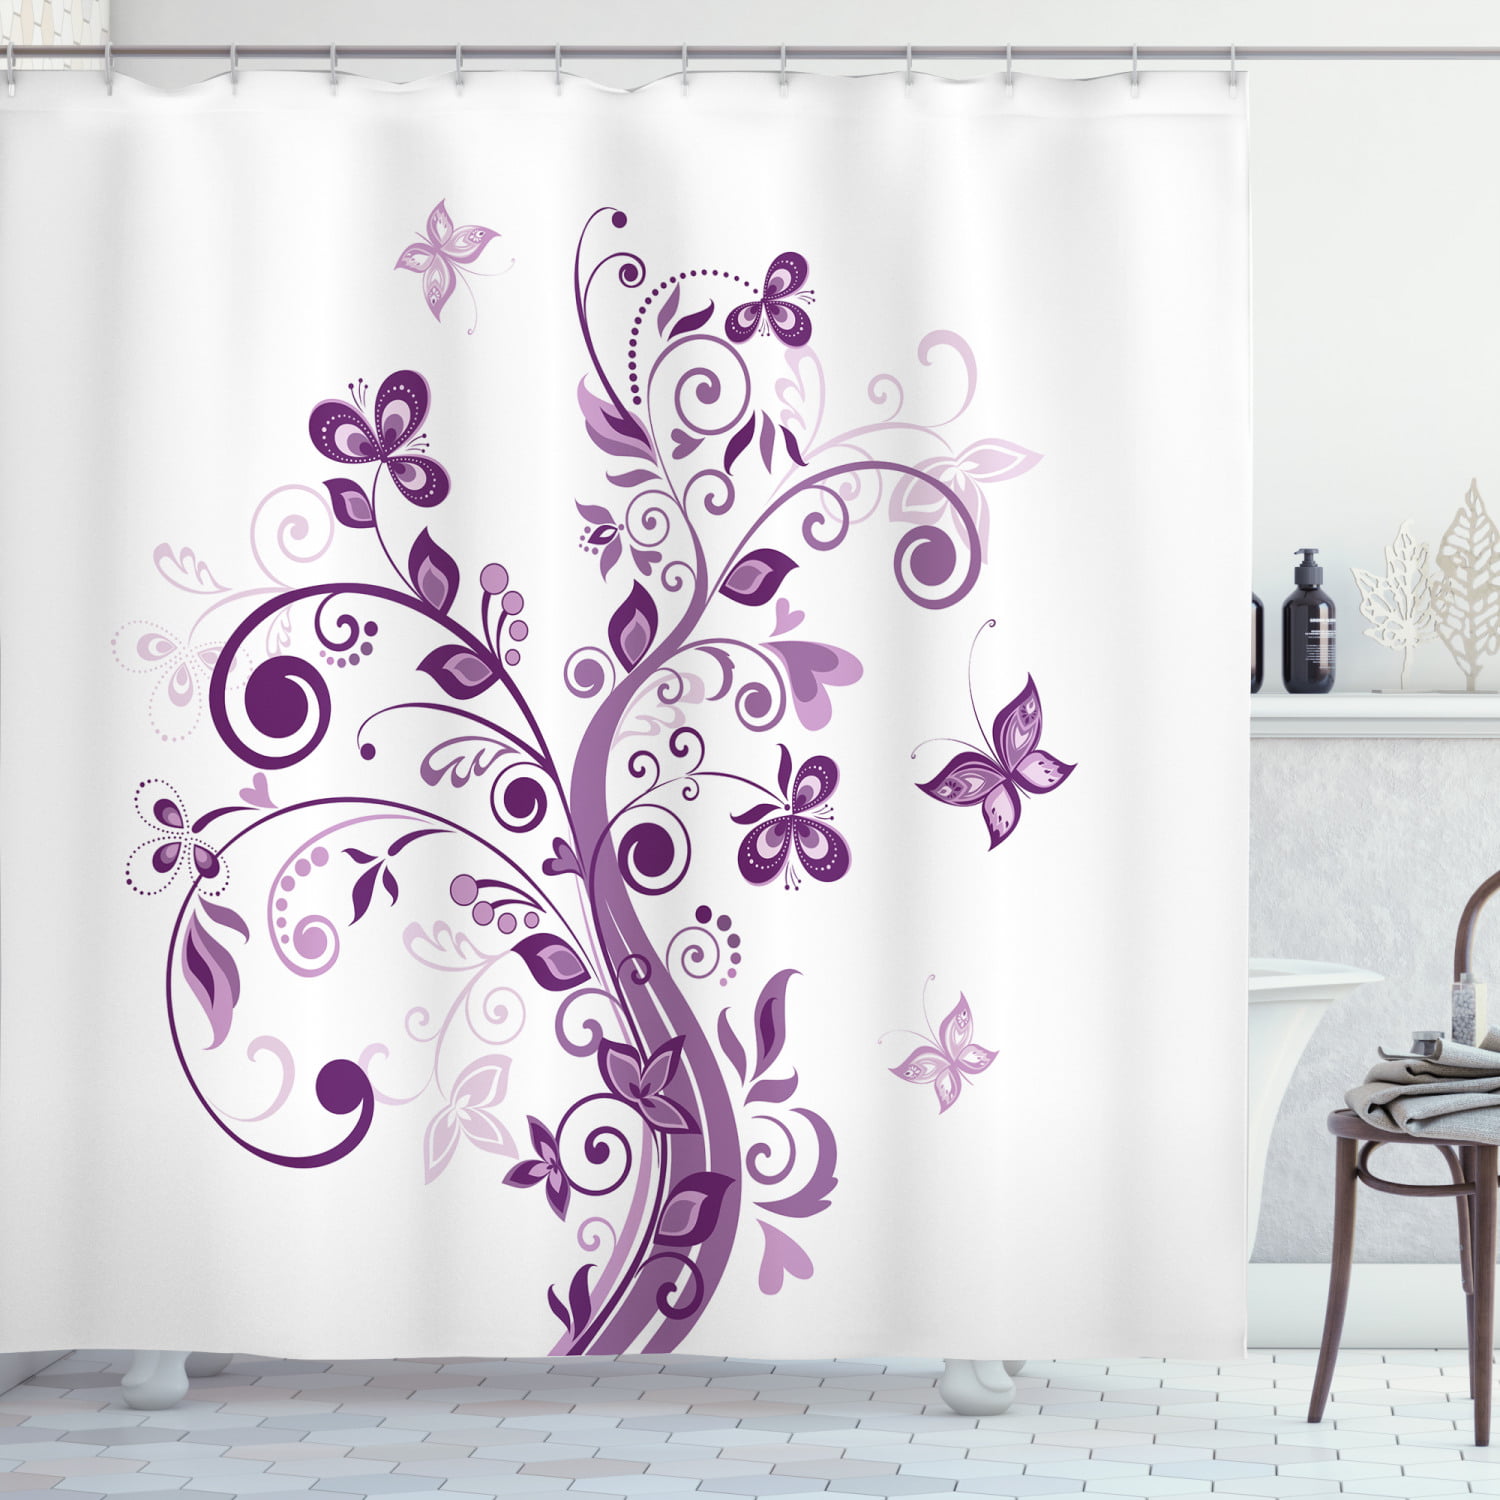 Details about   Flower Pattern Print Polyester Waterproof Washable Shower Curtain Set 12 Hooks 